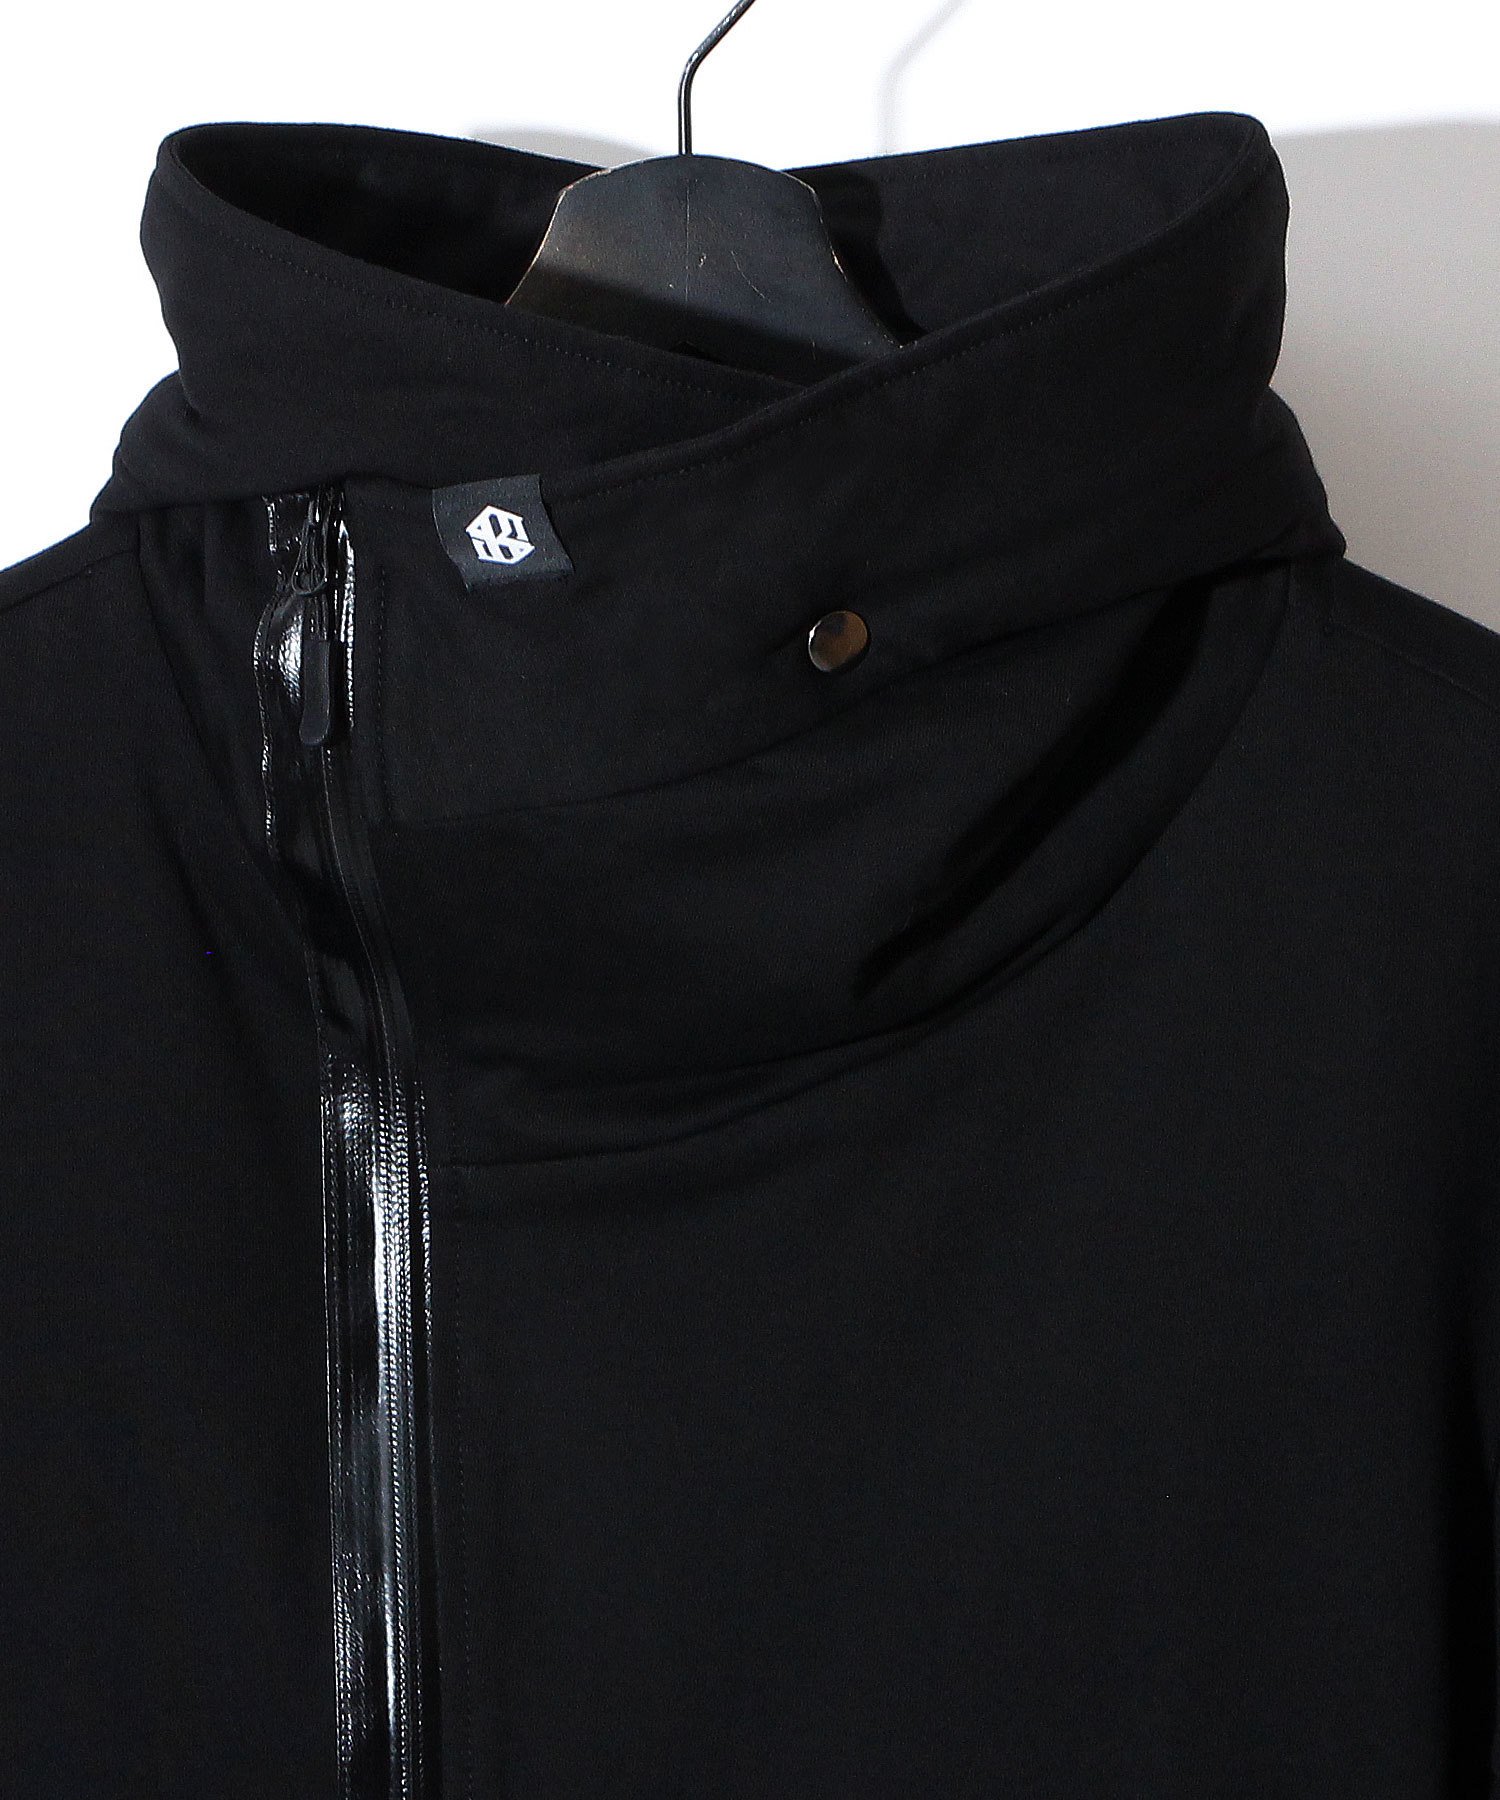 SWITCHBLADE （スイッチブレード） OUTLINE CHARACTERS WRAP PARKA 【BLACK】